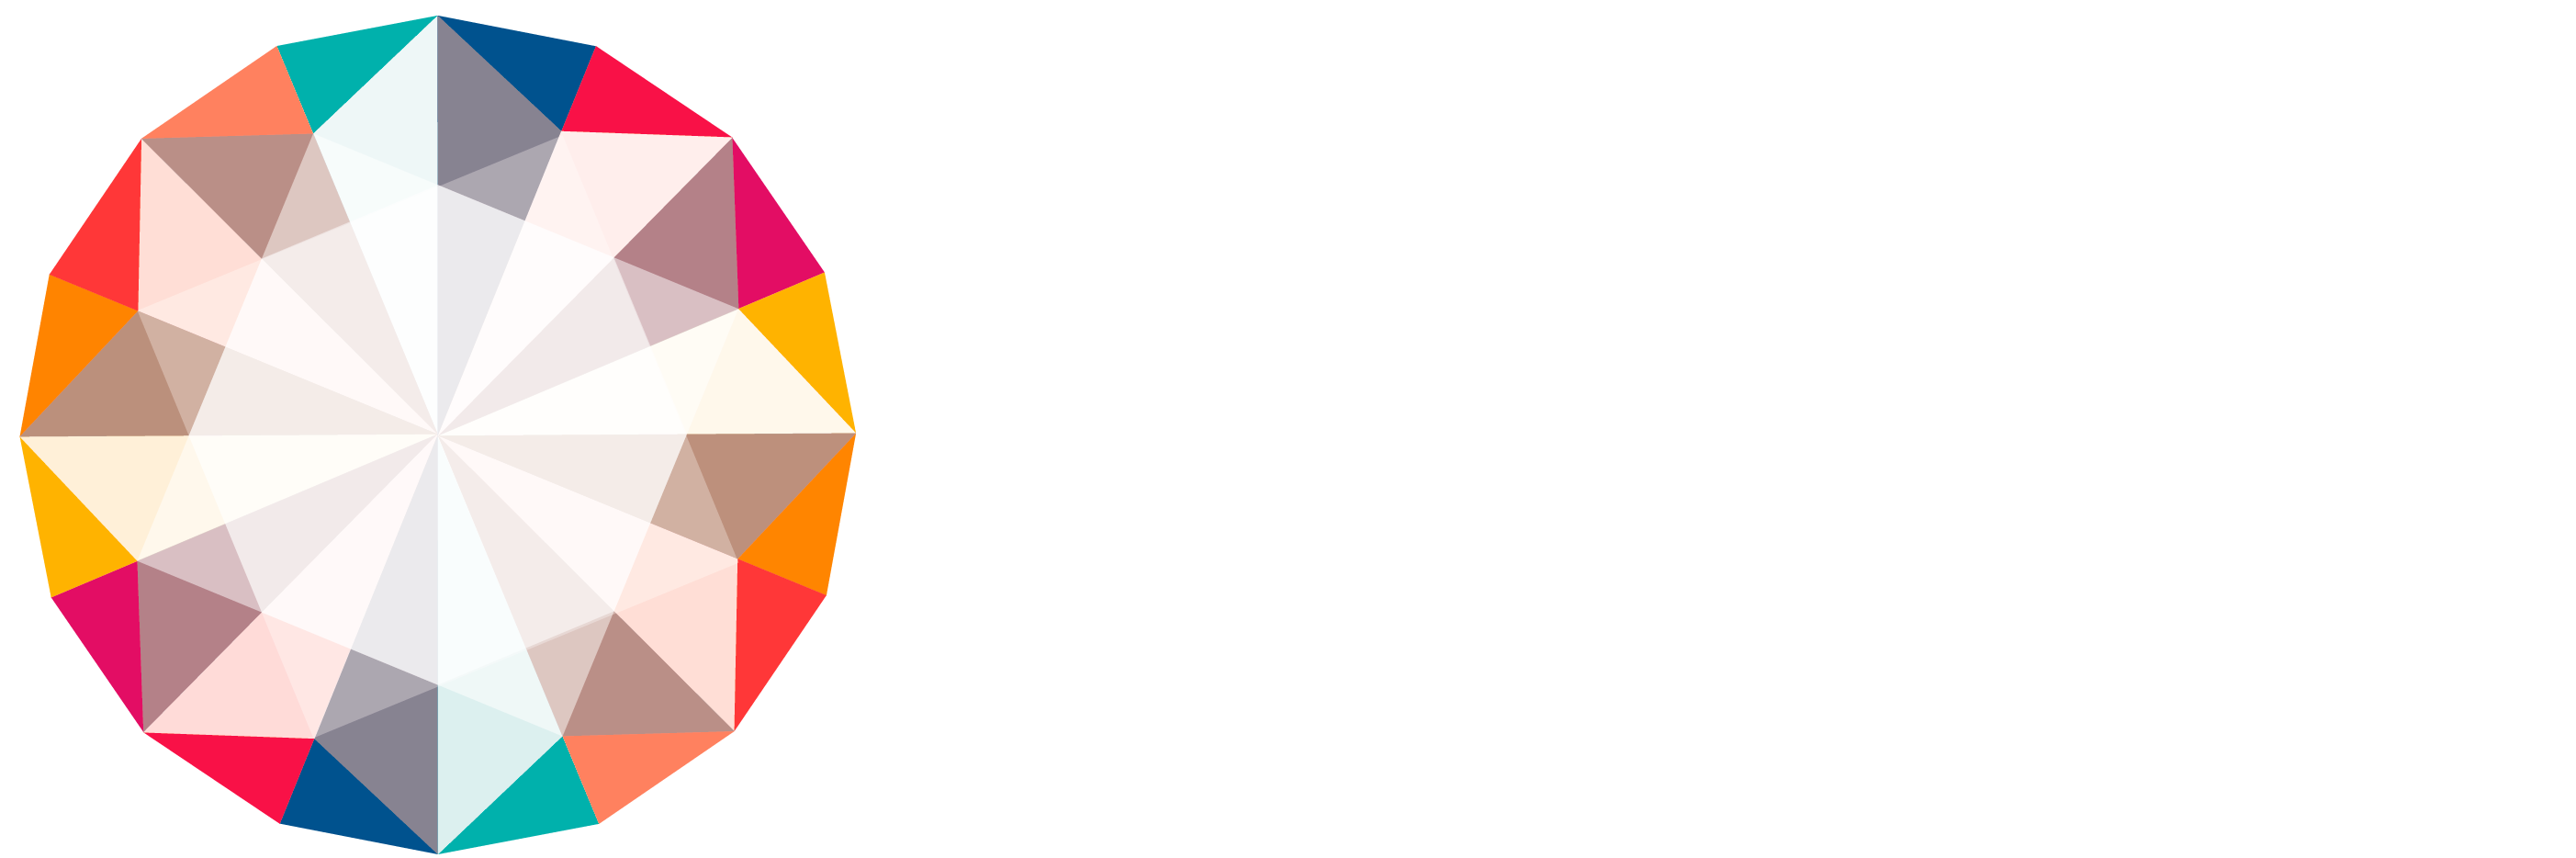 LEAD THE TALENT